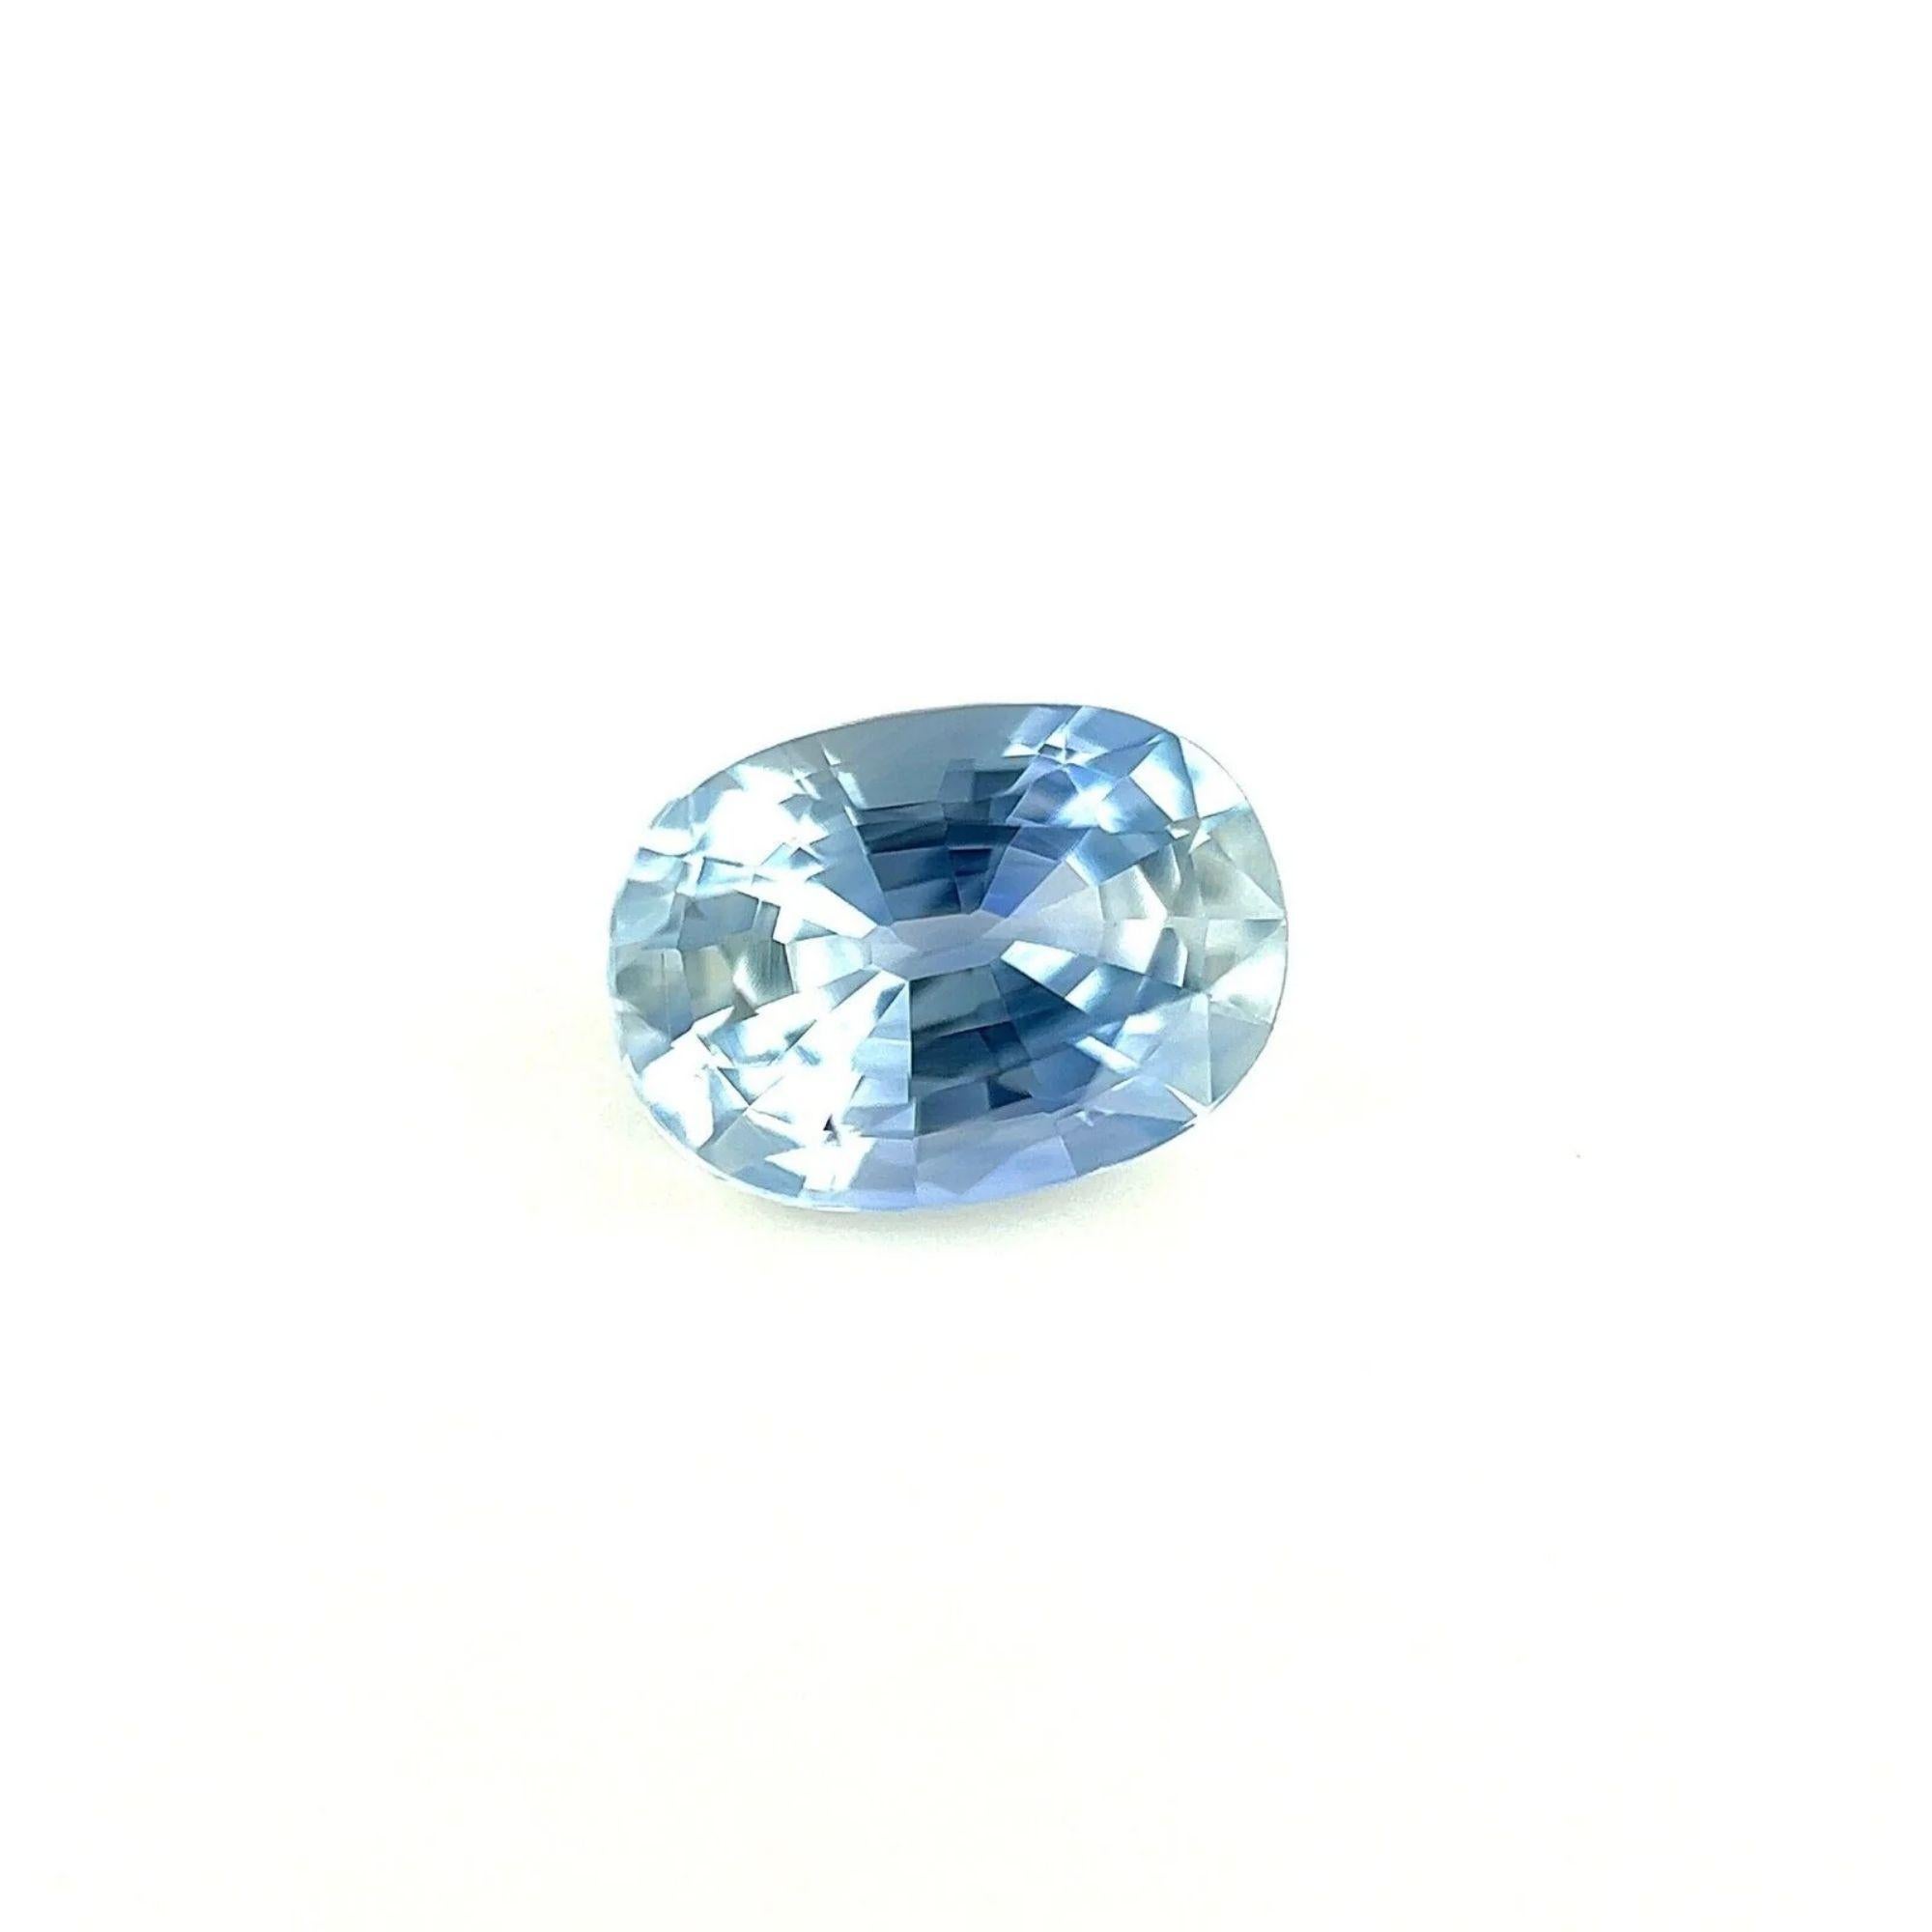 1.13ct Light Blue Ceylon Sapphire Oval Cut Loose Rare Gemstone 7X5mm VVS

Natural Light Blue Ceylon Sapphire Gemstone.
1.13 Carat with a beautiful light blue colour and excellent clarity. Very clean stone.
Also has an excellent oval cut and polish